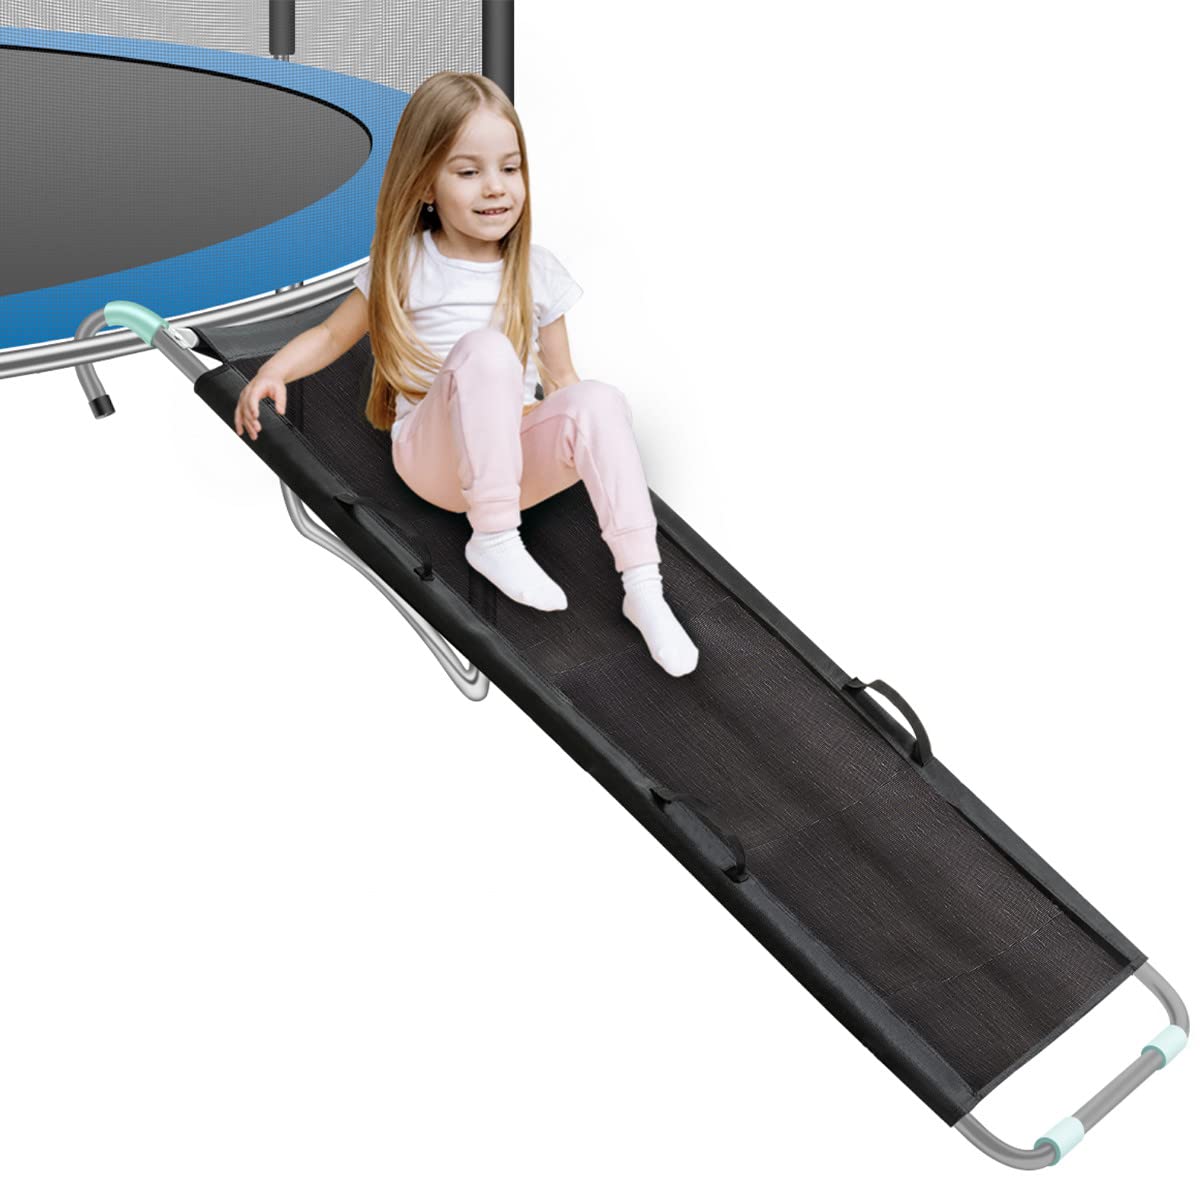 gemonExe Universal Trampoline Slide with Handles,Sturdy Trampoline Attachments with Strong Tear Resistant Fabric,Slide Ladder Le